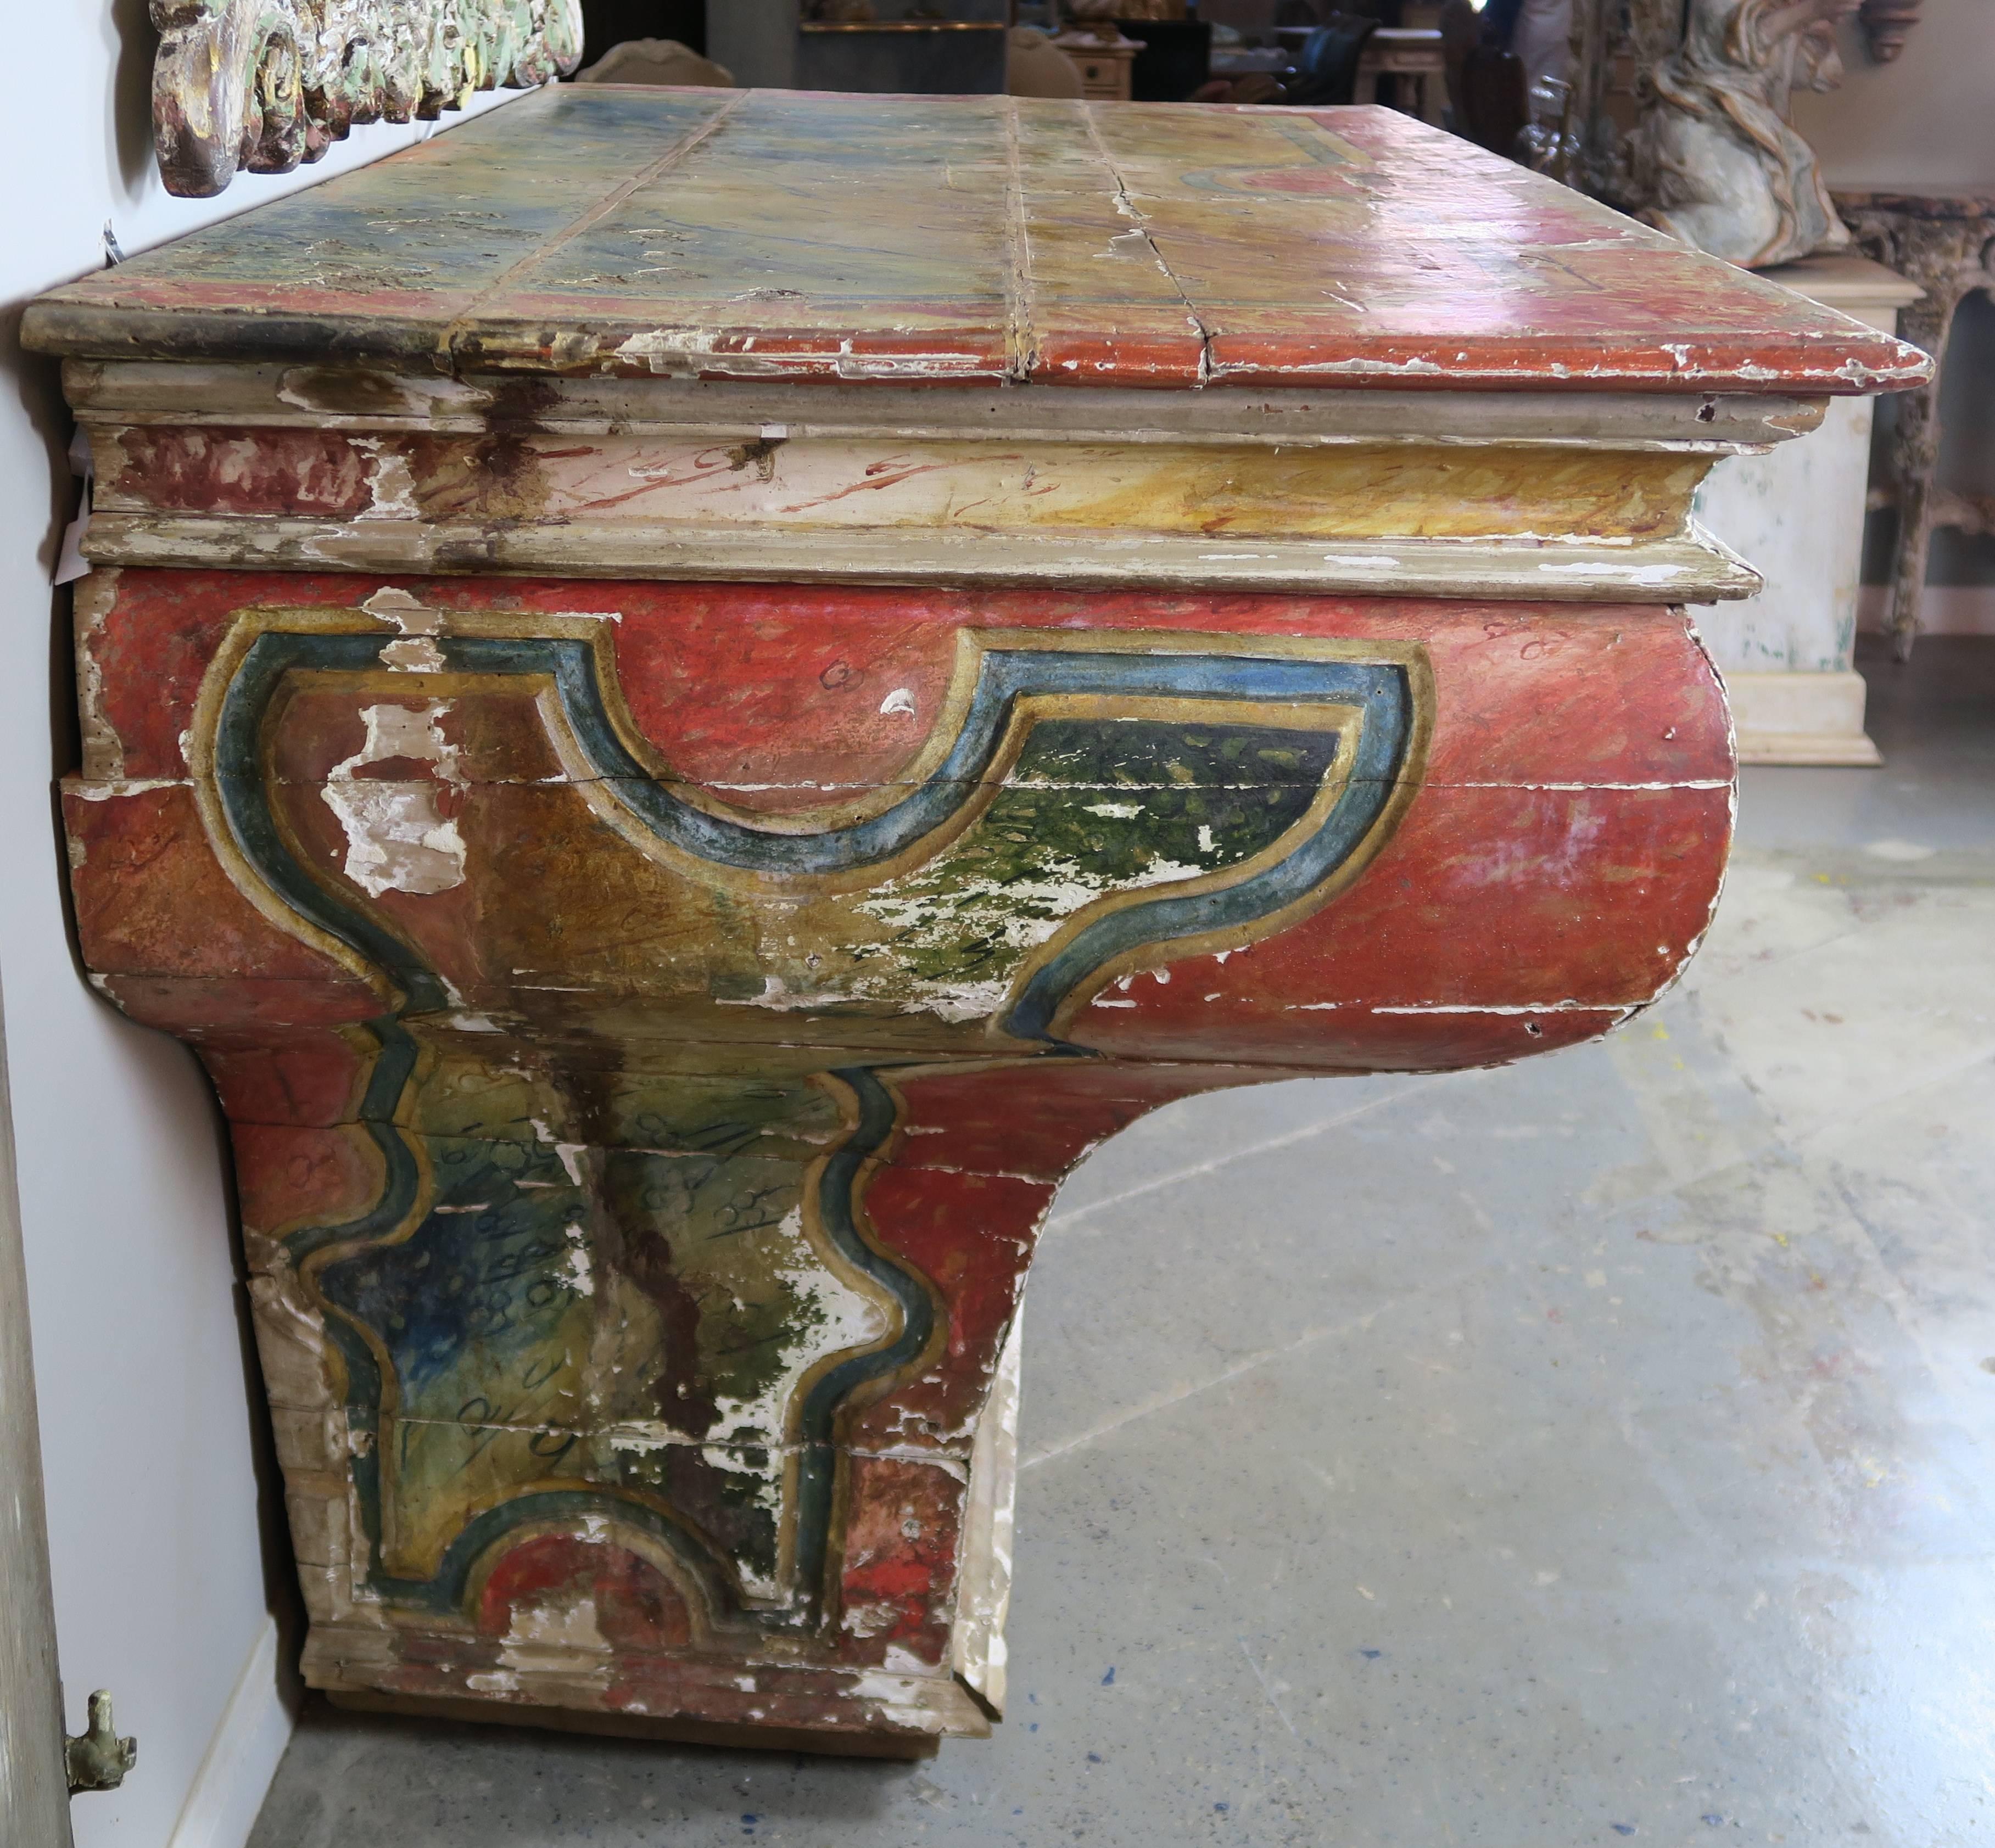 Early 19th century faux painted Spanish altar table in rich shades of blues, greens, and faded red. Worn paint with gesso showing underneath.